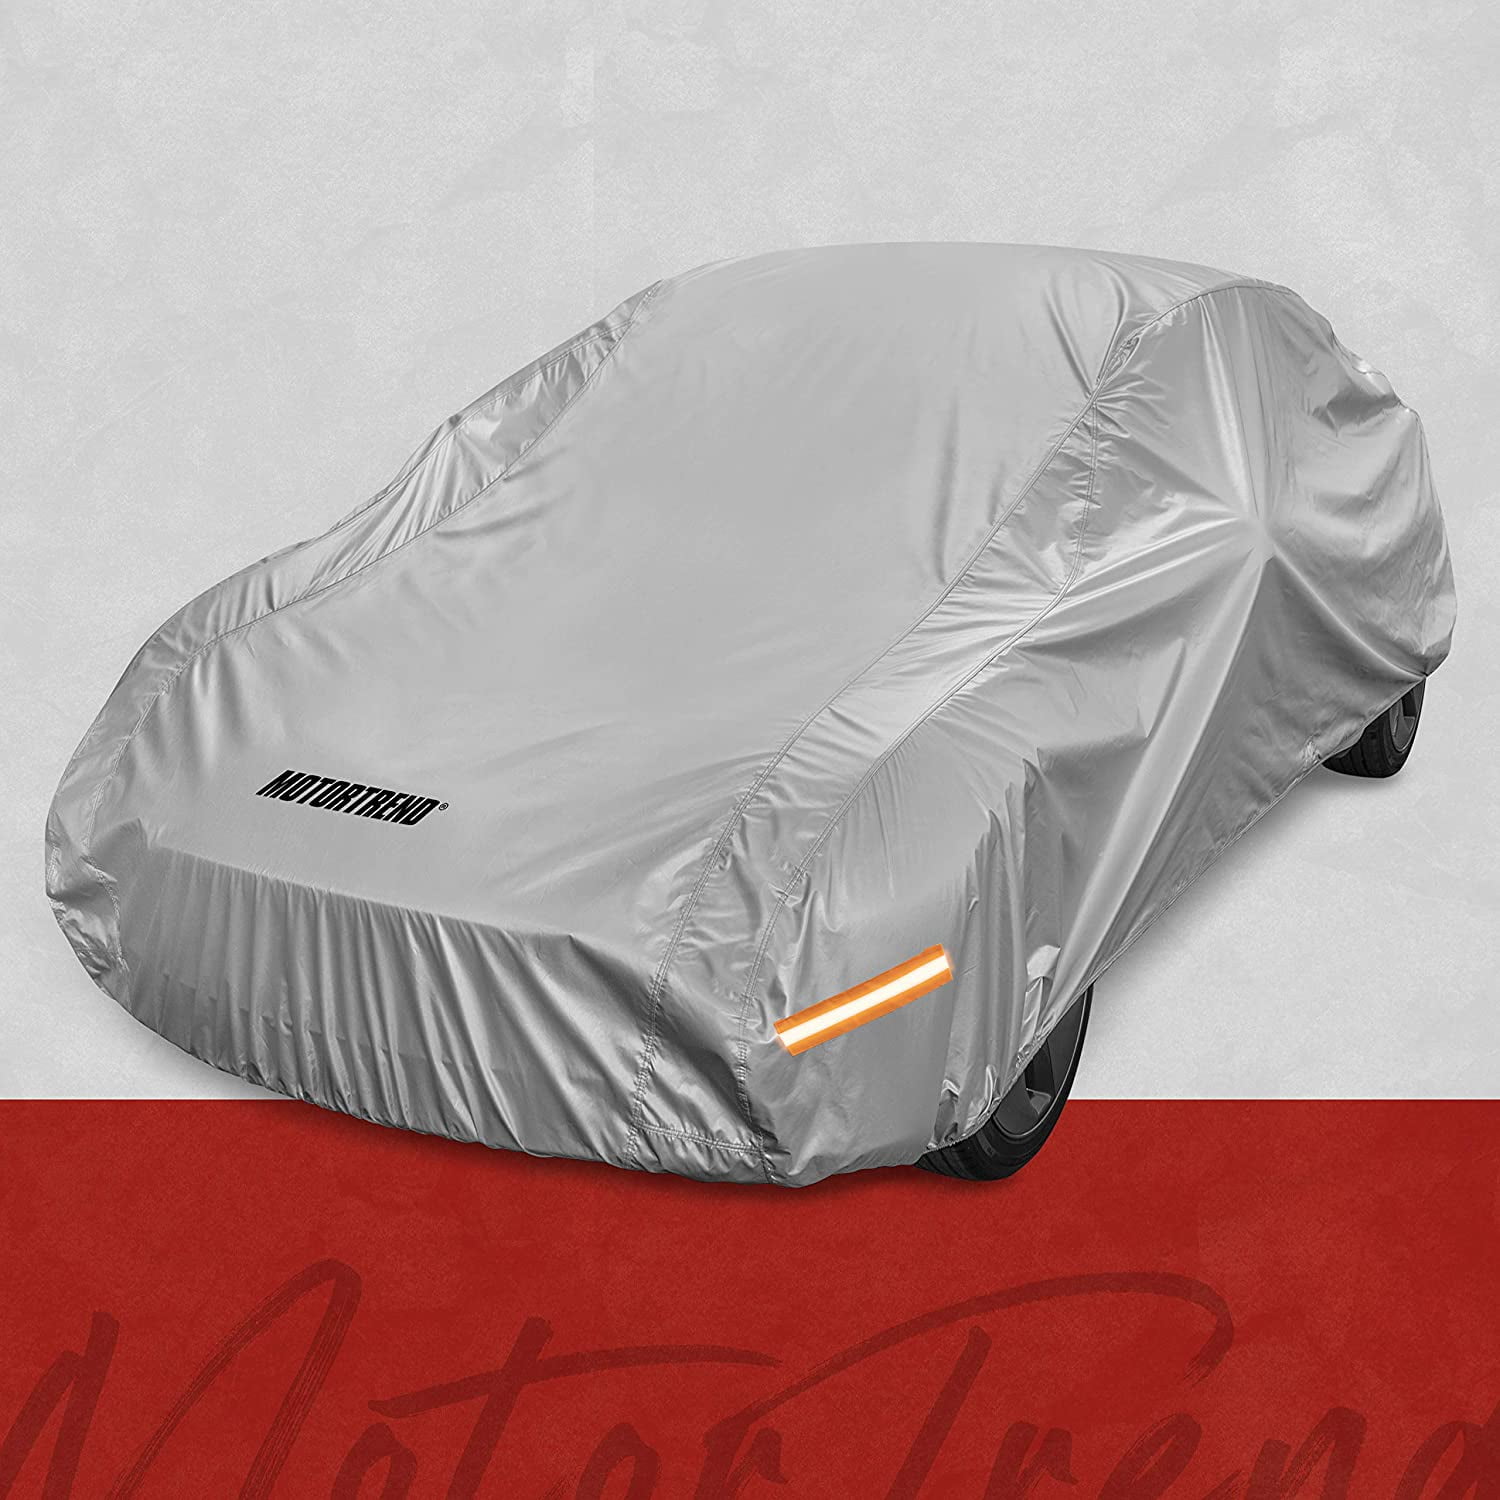 Motor Trend SafeKeeper All Weather Car Cover for Sedans Up to 190 L Waterproof 6-Layer for Outdoor Use Advanced Protection Formula OC-643N